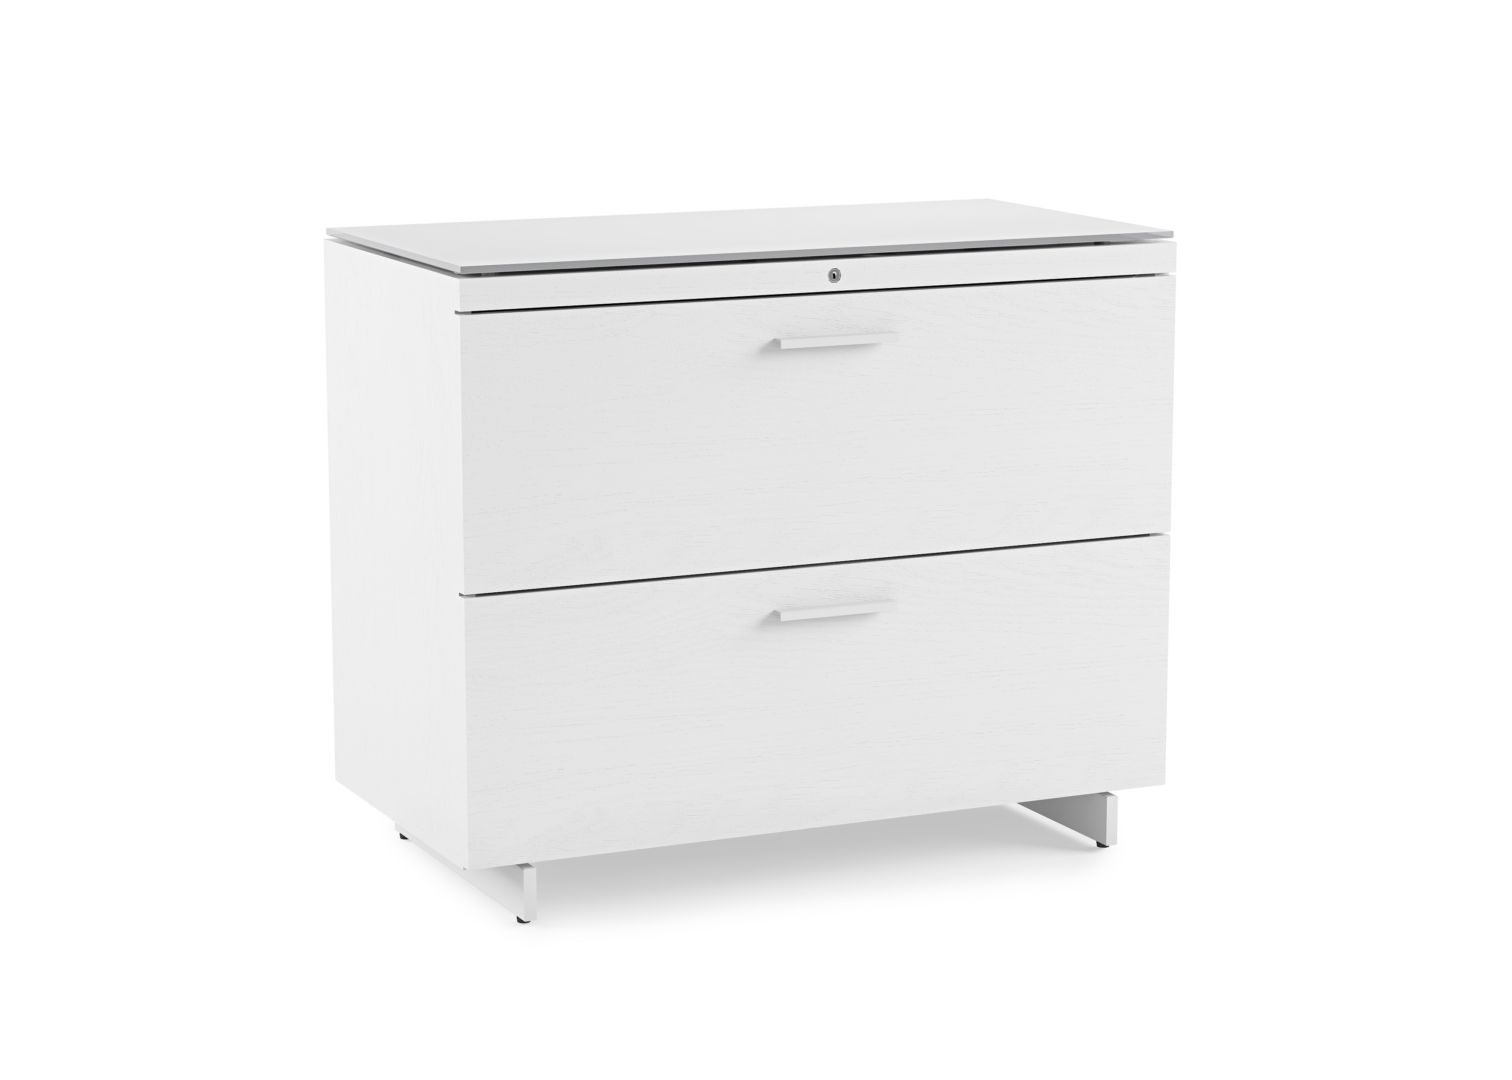 Bdi Centro 6416 Lateral File Cabinet The Century House Madison Wi within measurements 1512 X 1080